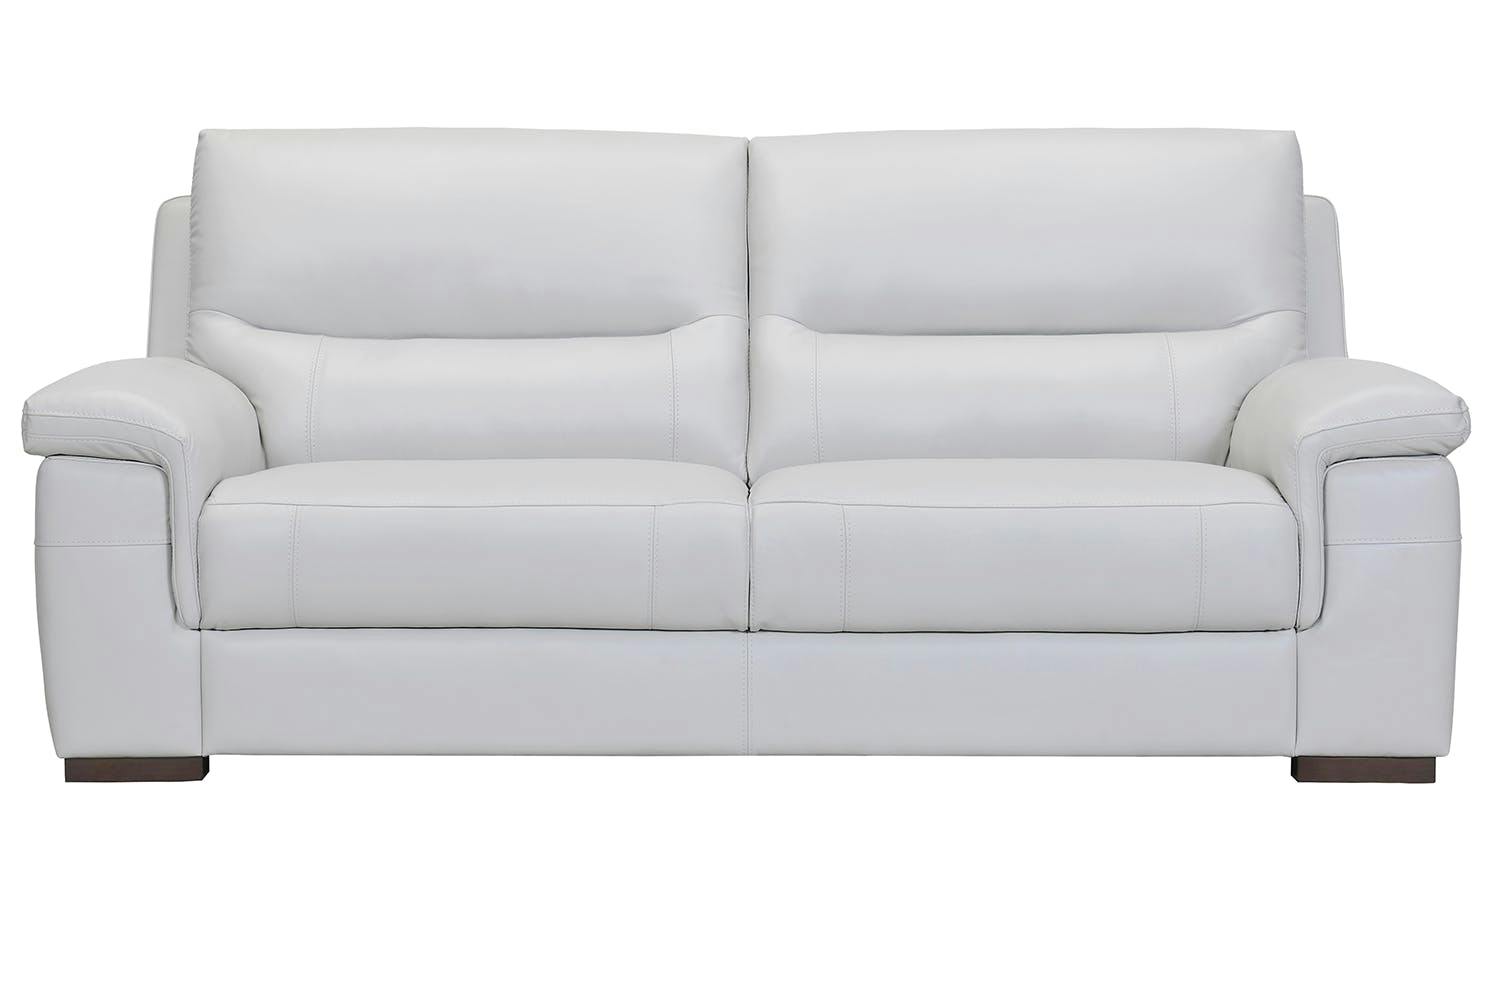 harvey norman leather sofa review